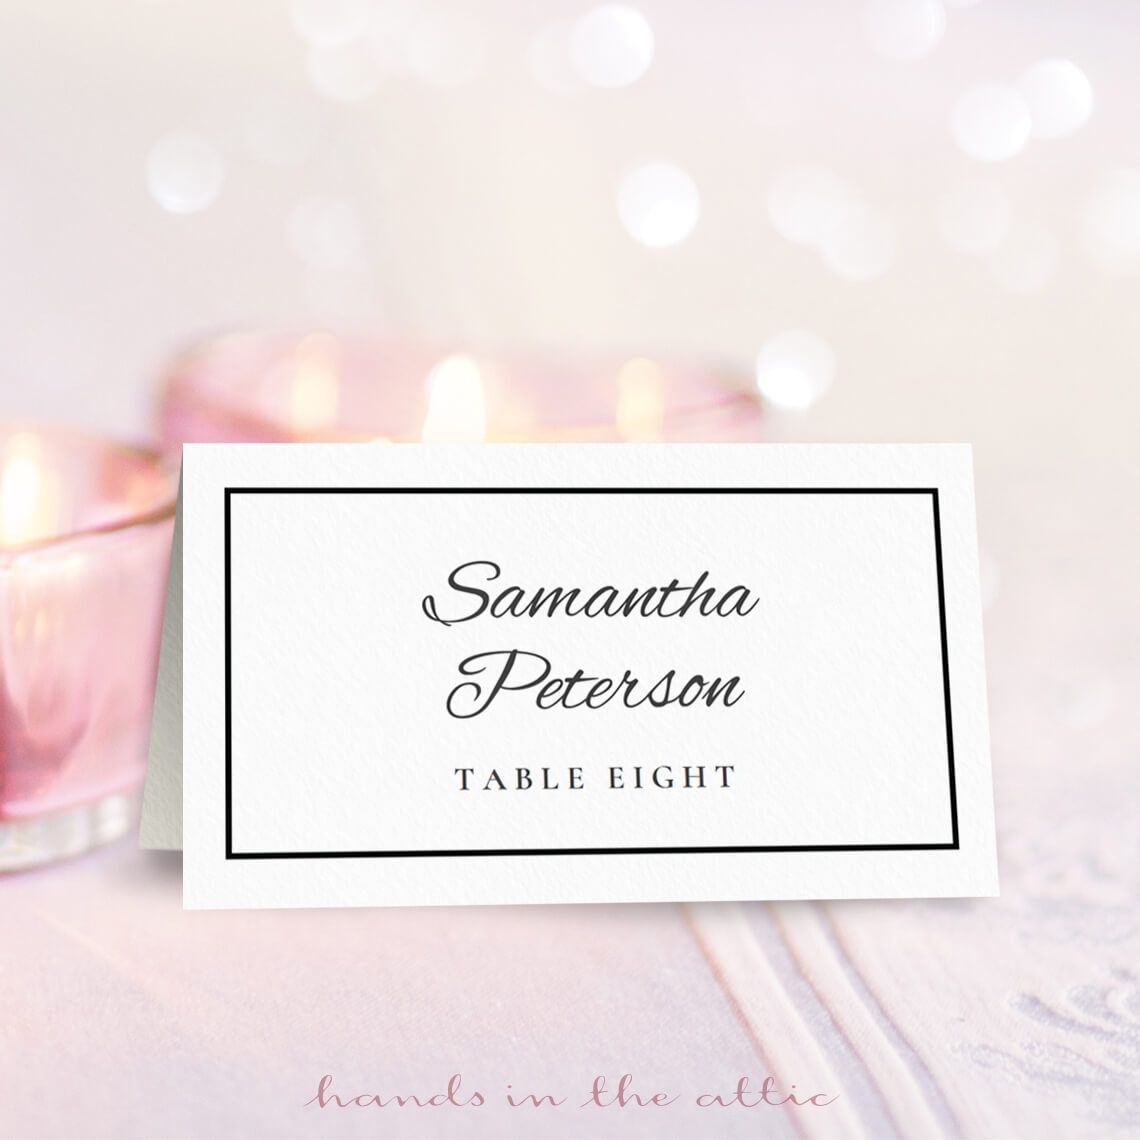 Wedding Place Card Template | Free On Handsintheattic Intended For Paper Source Templates Place Cards